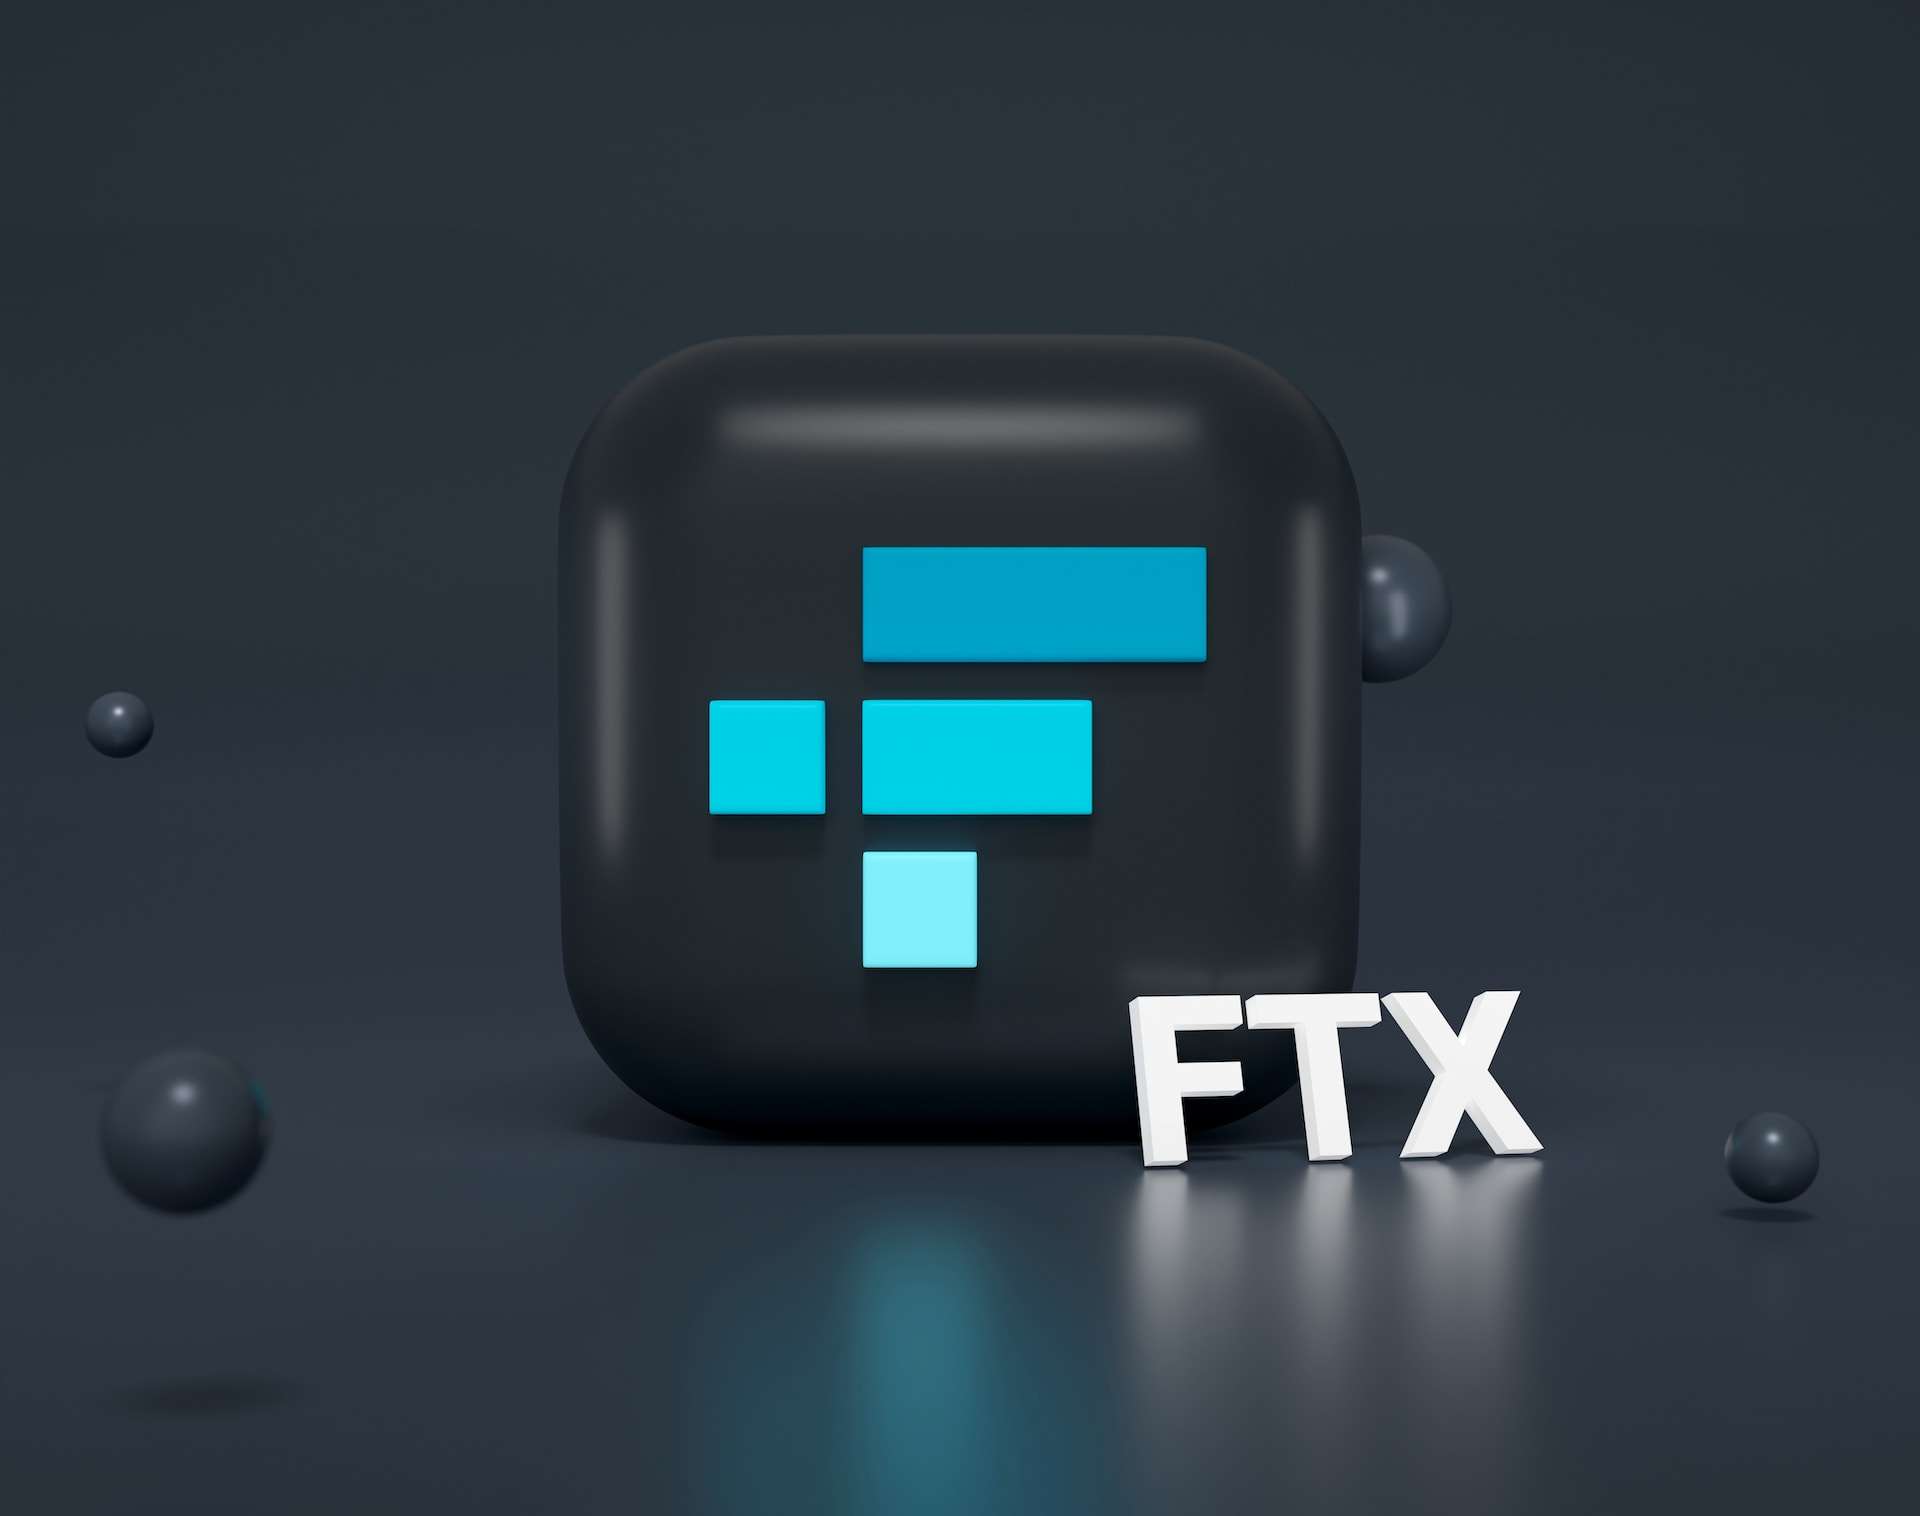 Graphic showing the FTX